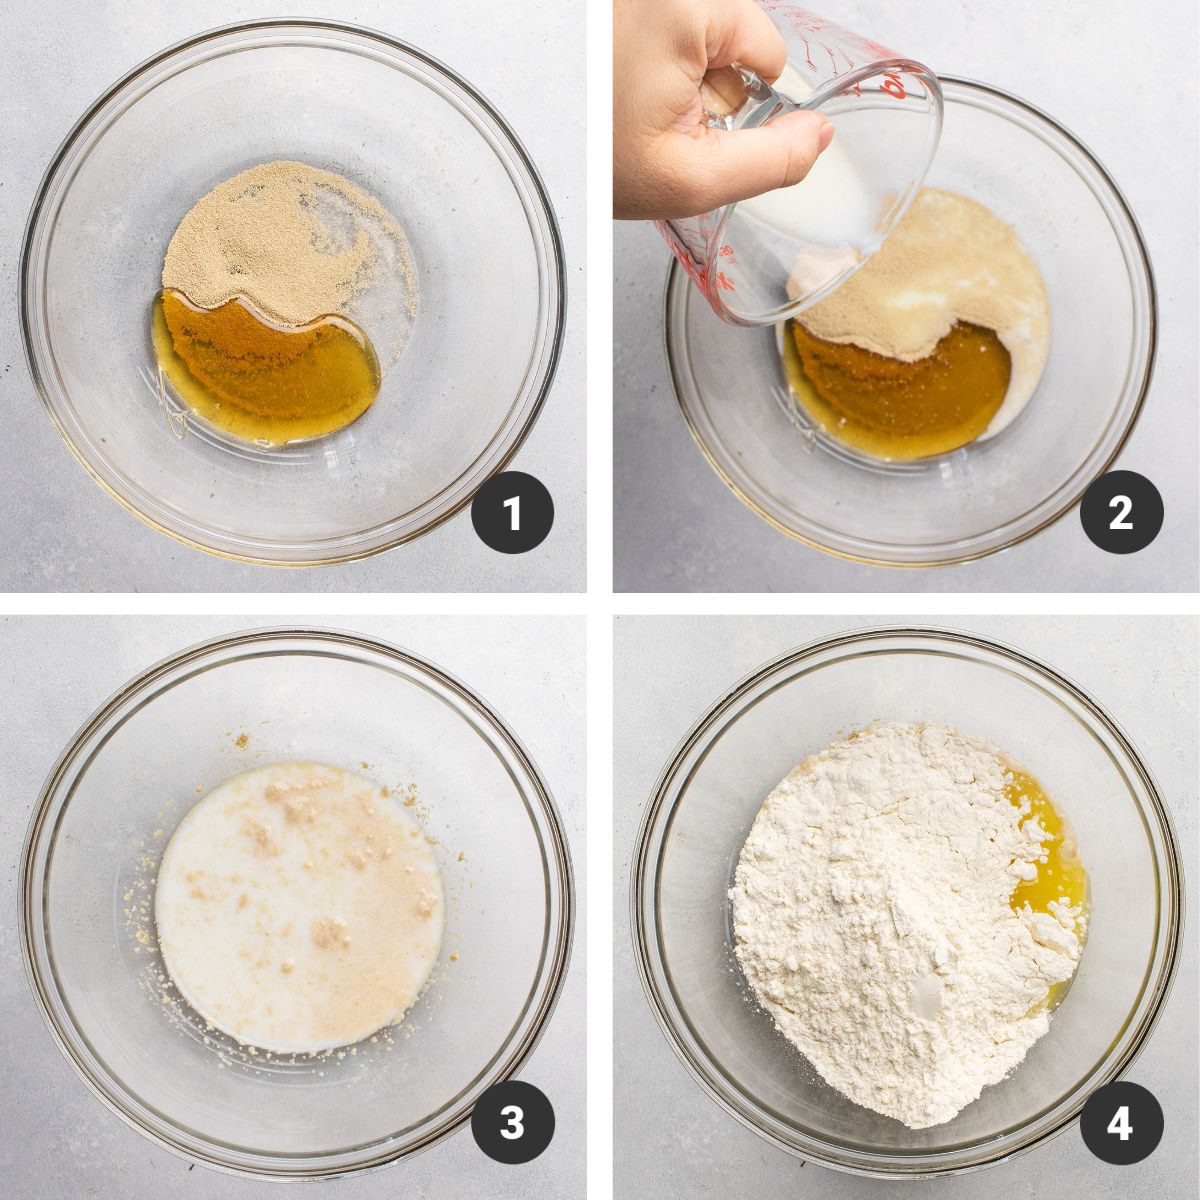 Mixing yeast, honey, and water in a glass mixing bowl.